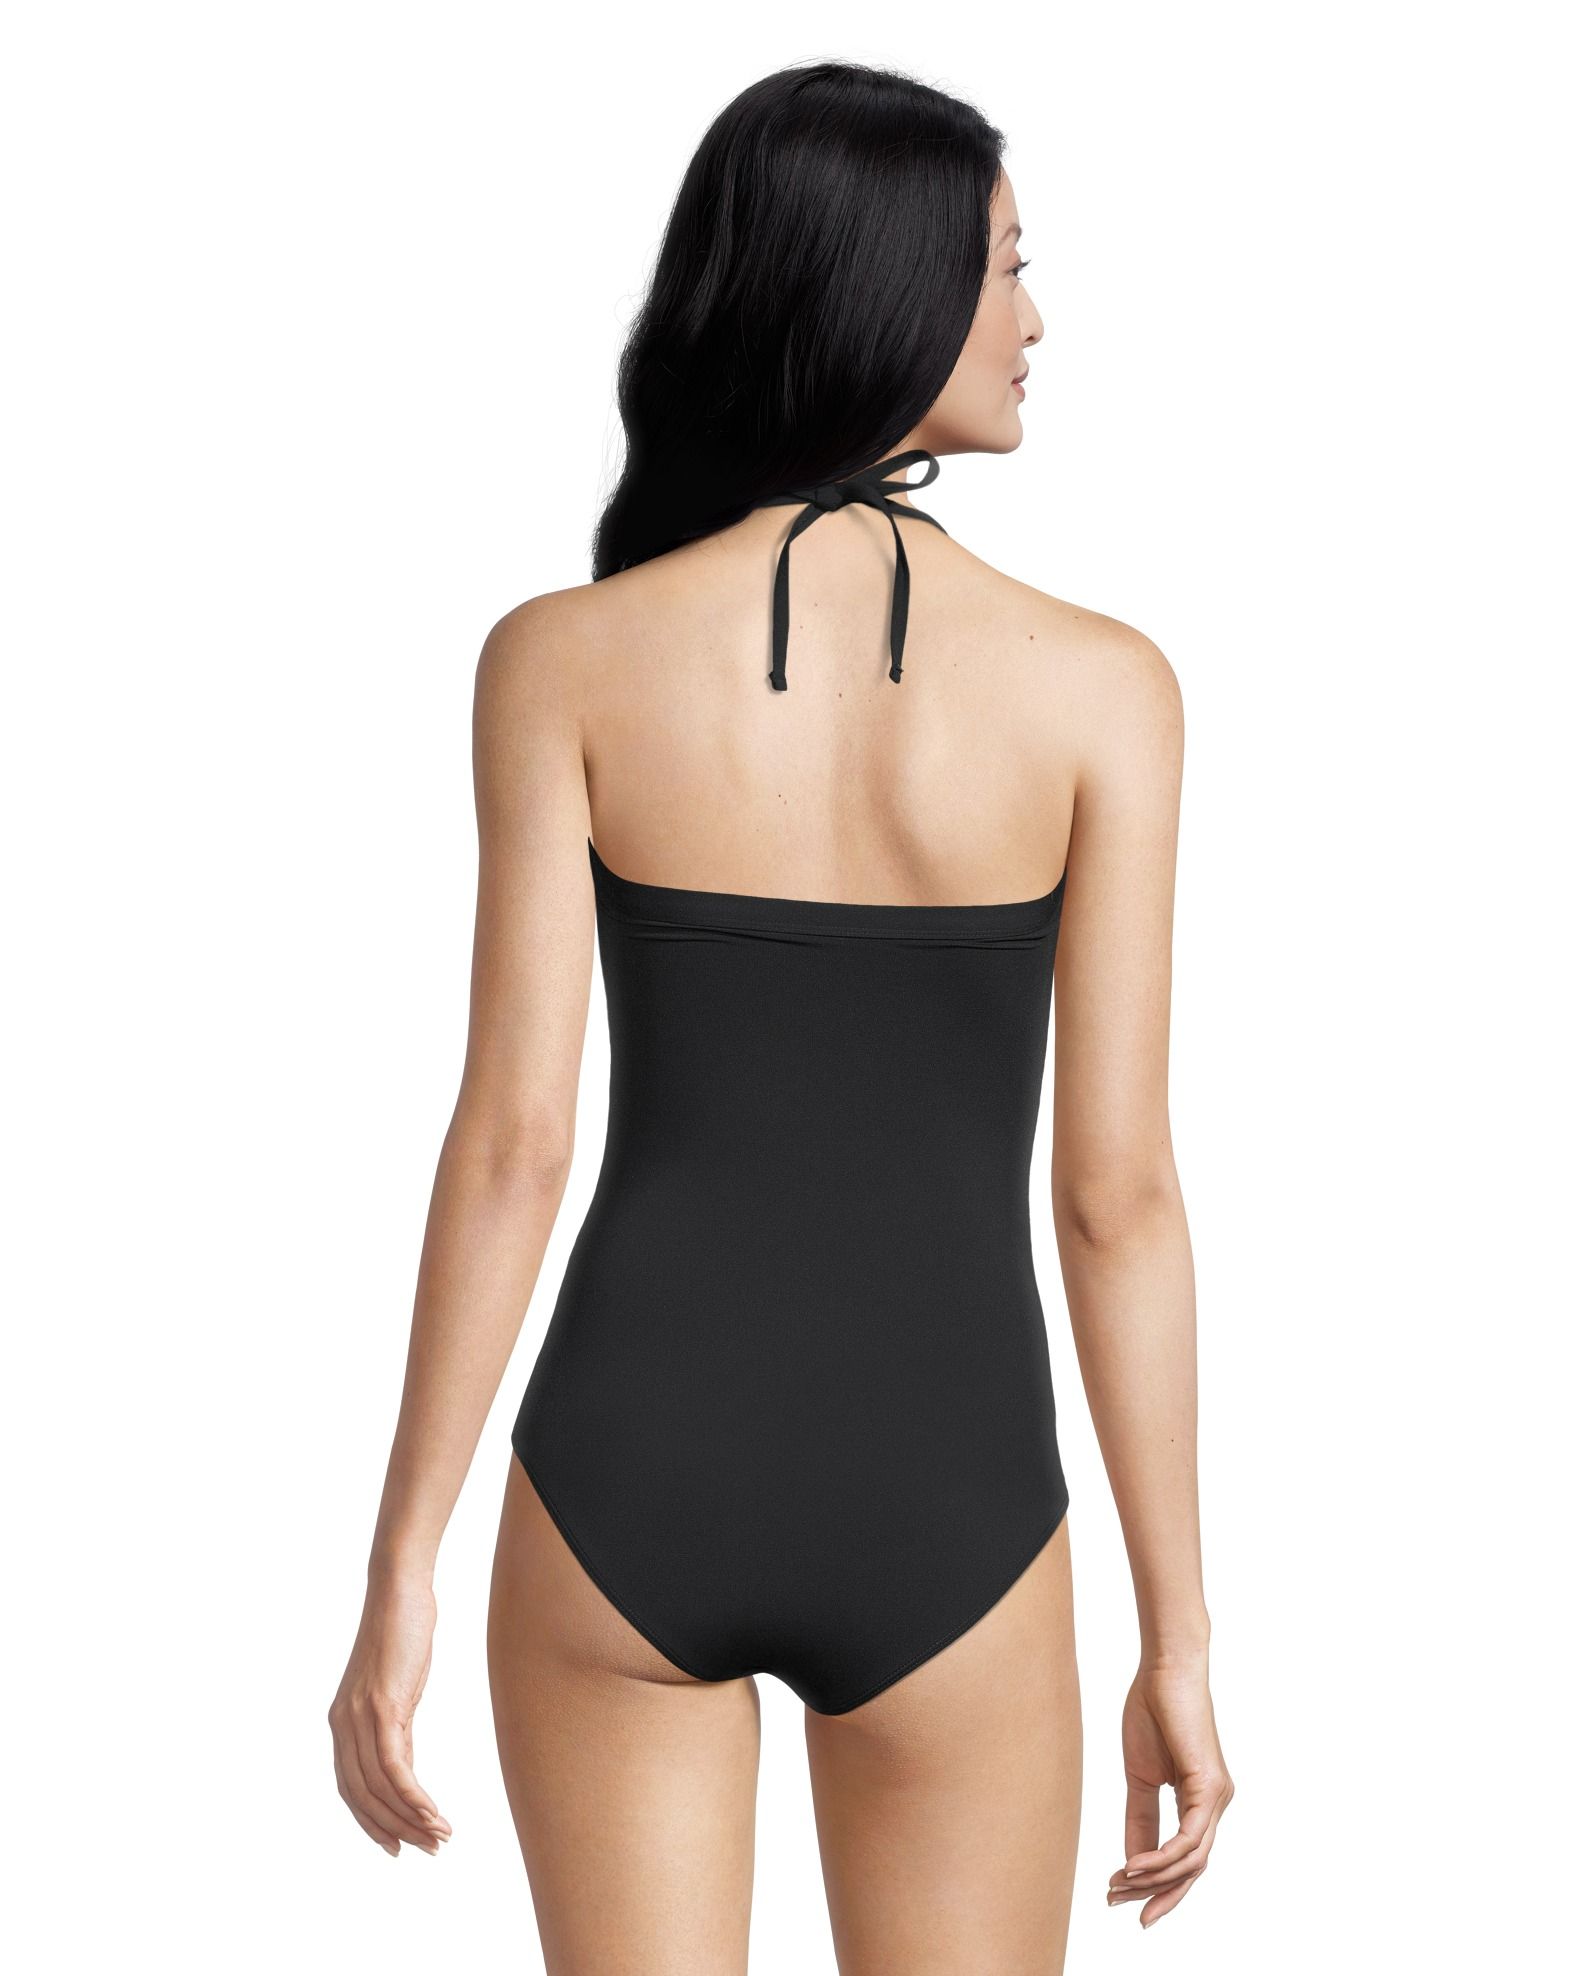 Women's One Piece Ruched Convertible Bandeau Swim Top | Marks